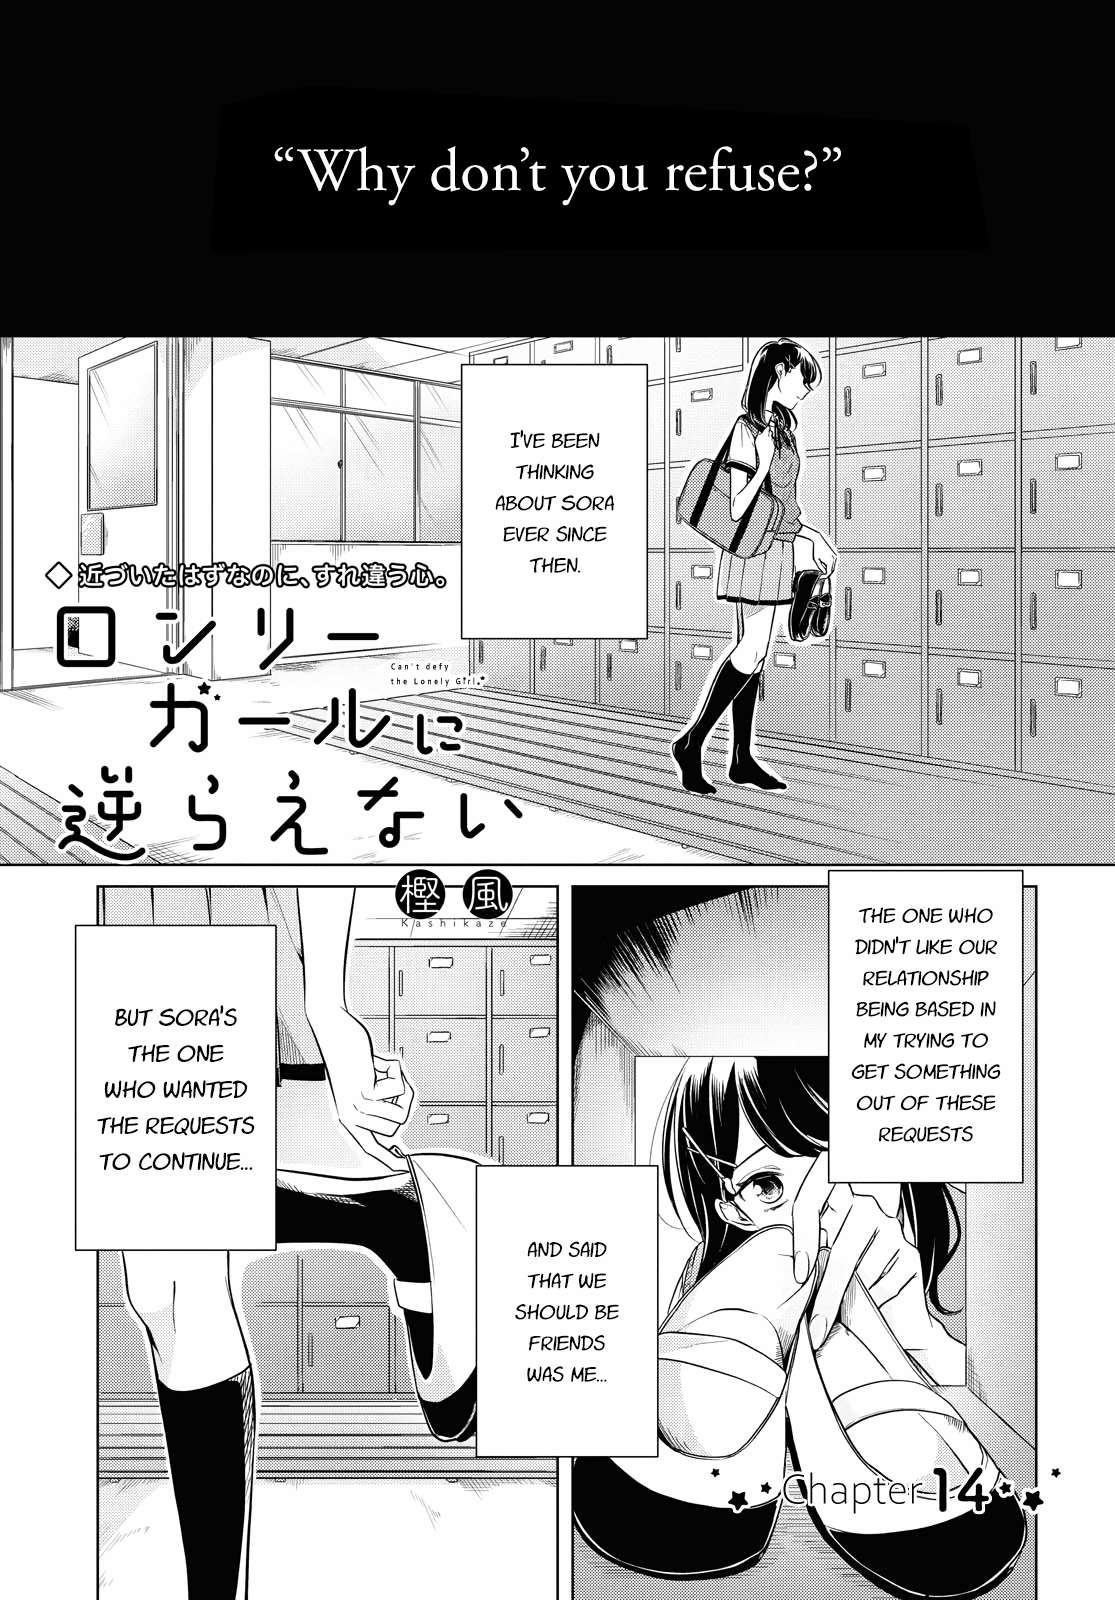 I Can’t Say No to the Lonely Girl - chapter 14 - #1